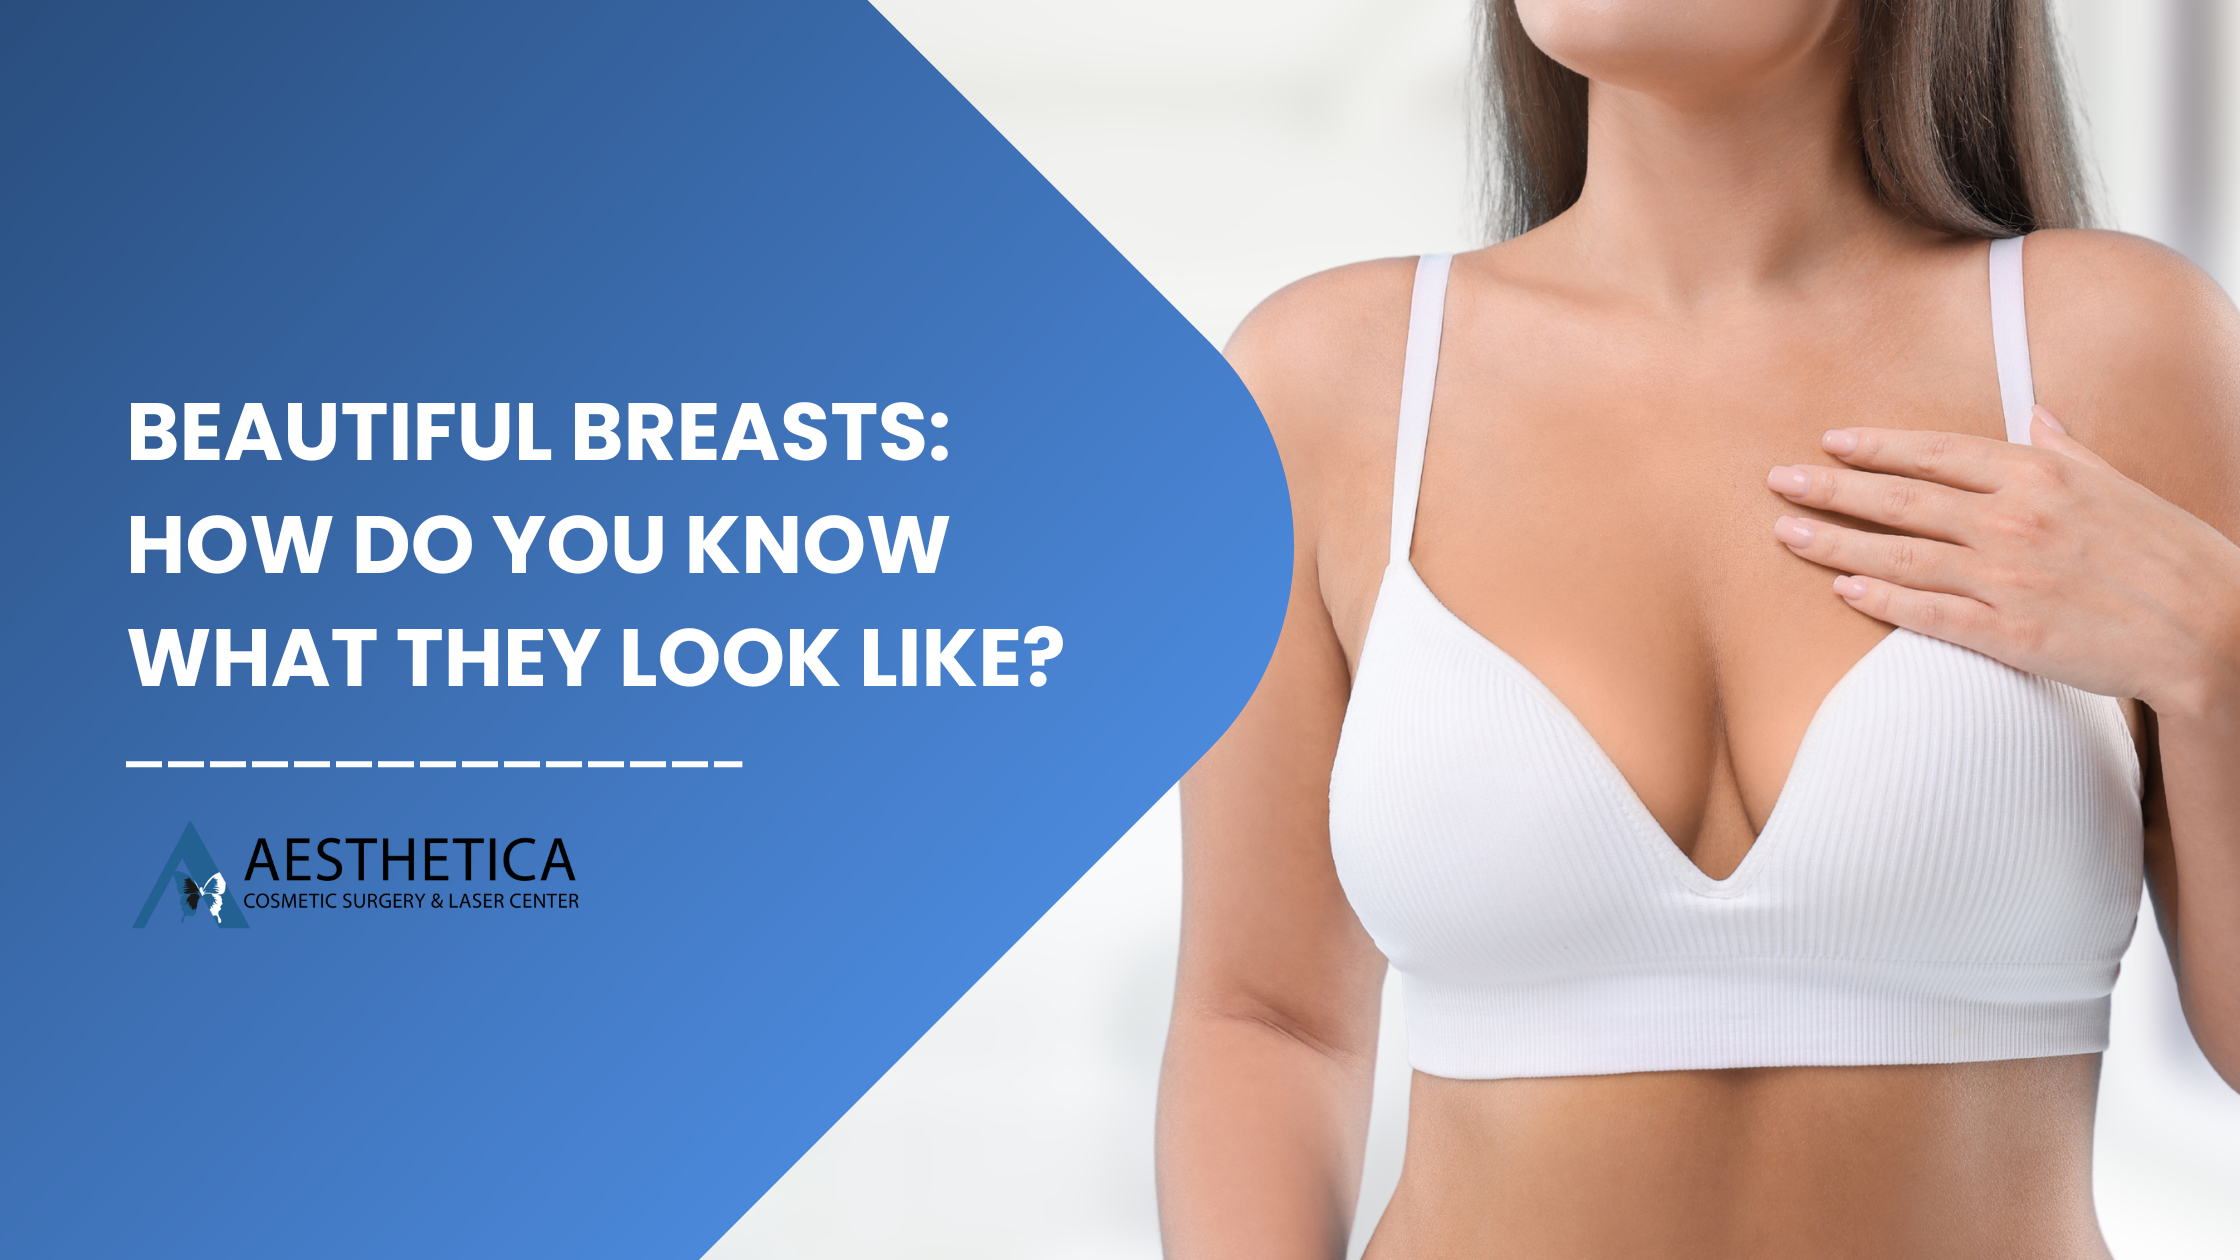 Beautiful Breasts: How Do You Know What They Look Like?